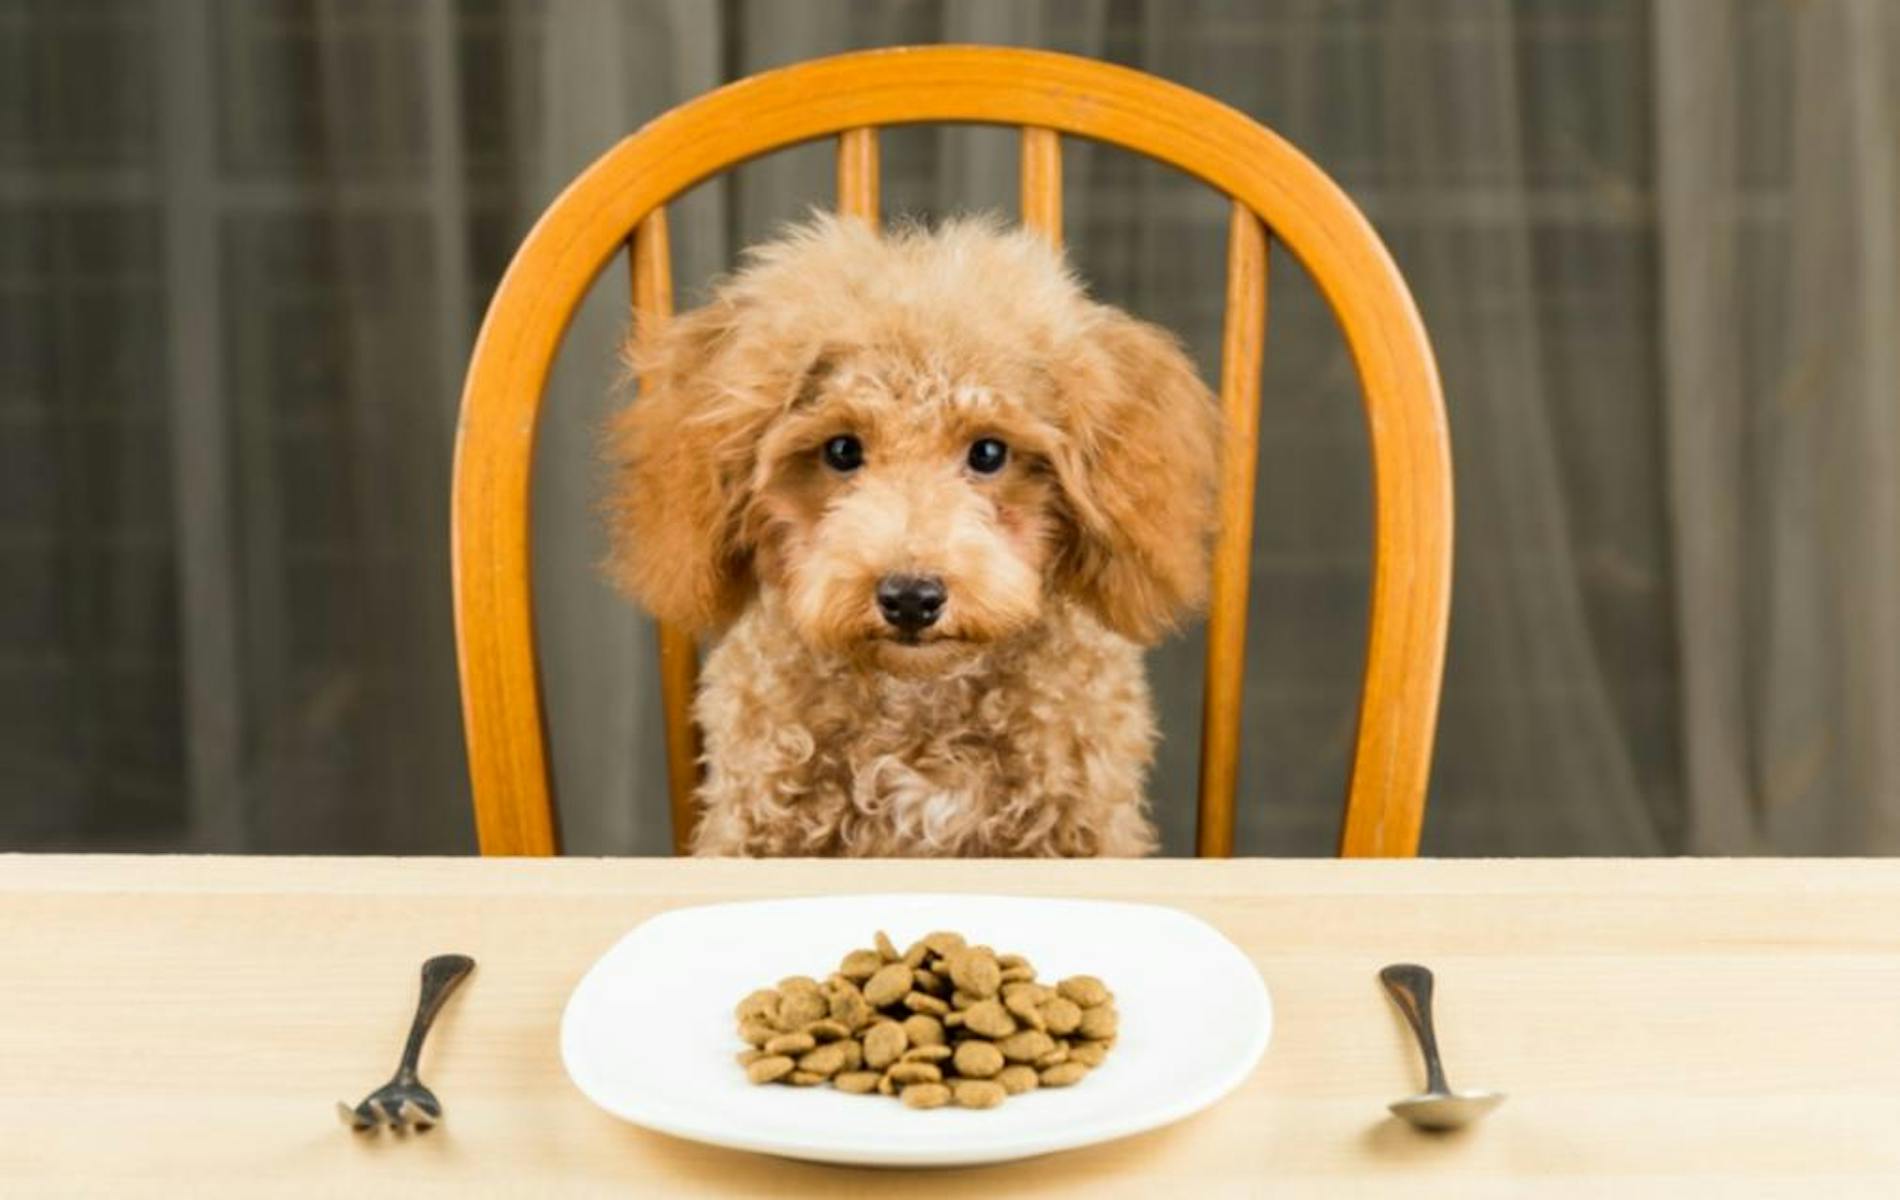 Dog at table in front of food plate